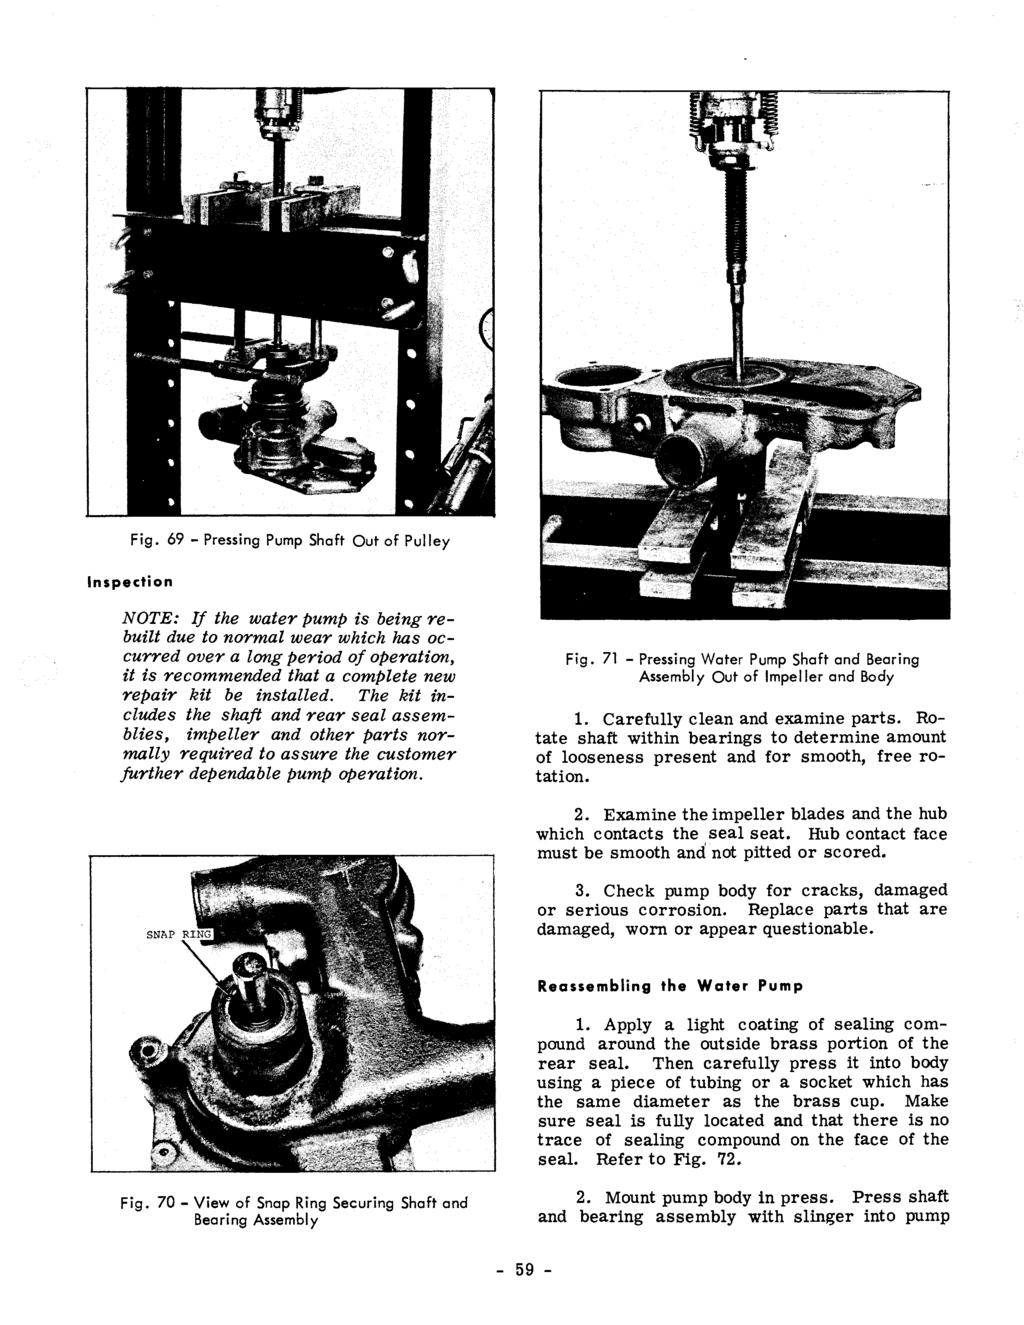 Fig. 69 - Pressing Pump Shaft Out of Pulley Inspection NOTE: If the water pump is being rebuilt due to normal wear which has occurred over a long period of operation, it is recommended that a